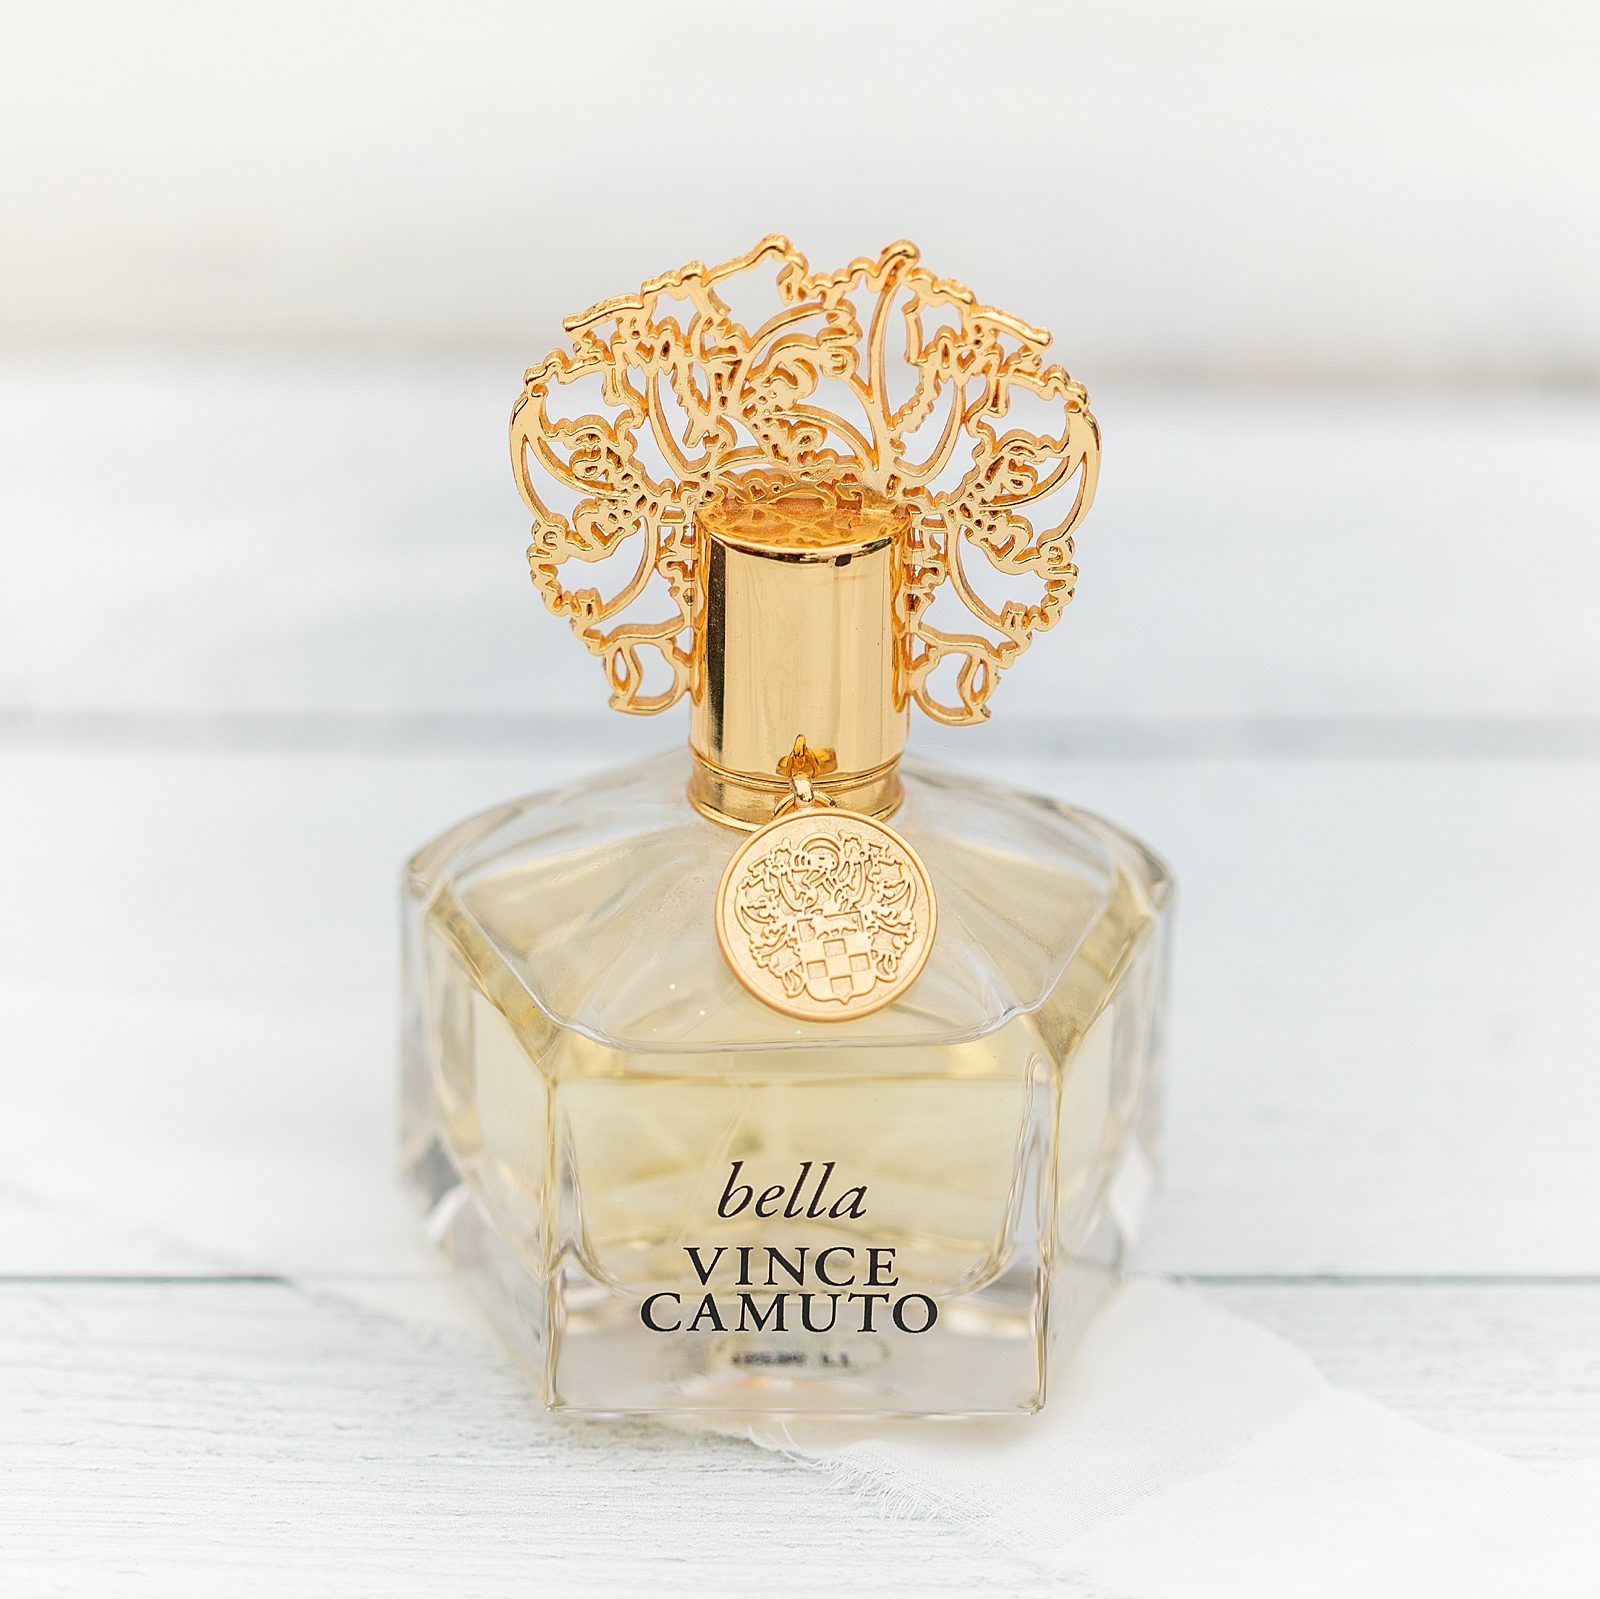 Vince Camuto's Bella perfume detail photographed by Bree Thompson of Sherr Weddings based in San Diego, California.